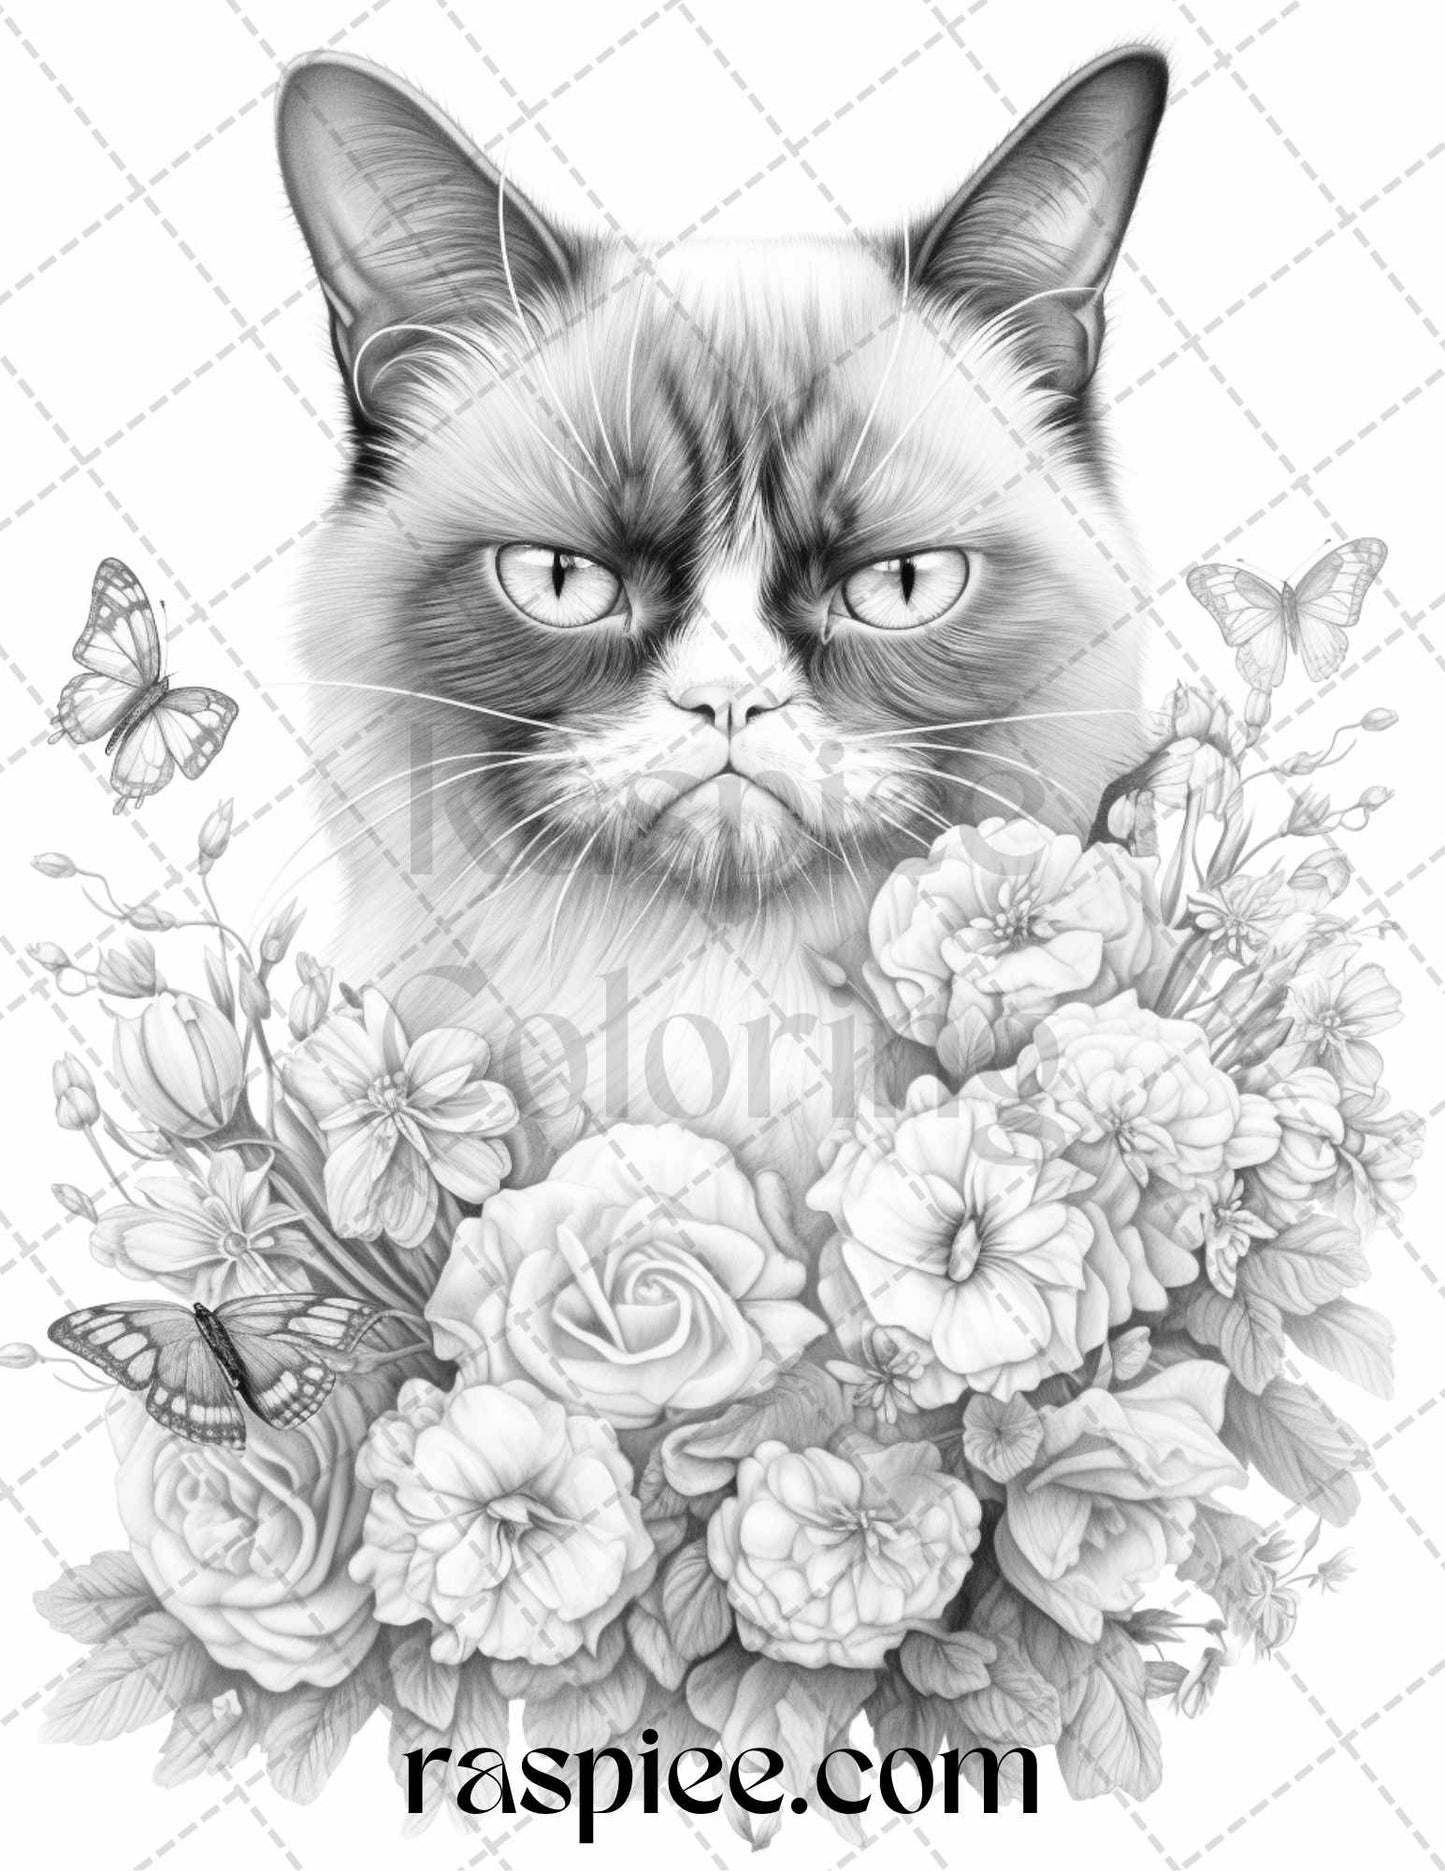 Grumpy Cat Coloring Pages for Adults, Printable Stress Relief Art, High-Quality Grayscale Cat Illustrations, Adult Coloring Book PDF Download, Cat Lovers Creative Hobby, Mindful Coloring Sheets, Cat Grayscale Coloring Pages, Animal Coloring Pages for Adults, Cat Coloring Pages Printable